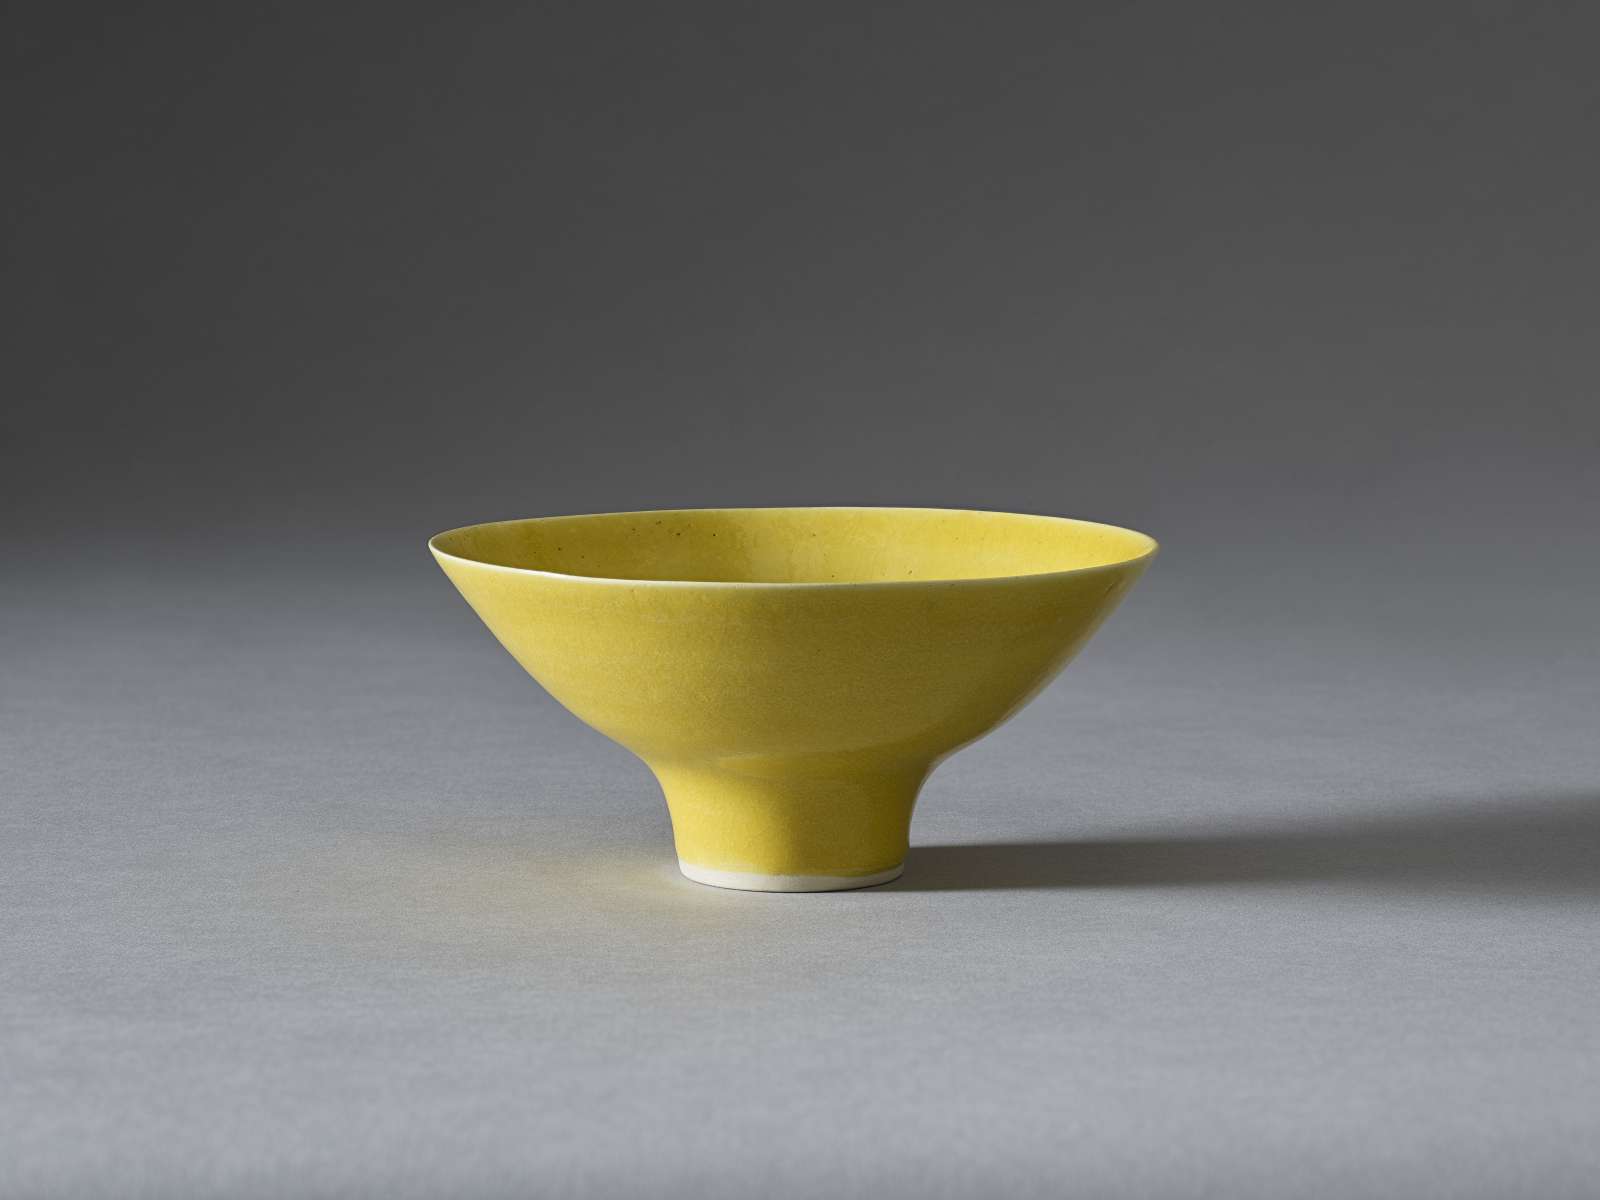 Lucie Rie, Yellow Footed Bowl, Impressed with artist’s seal, Porcelain with an all-over ‘American yellow’ glaze, height 8.5 cm, diameter 18 cm